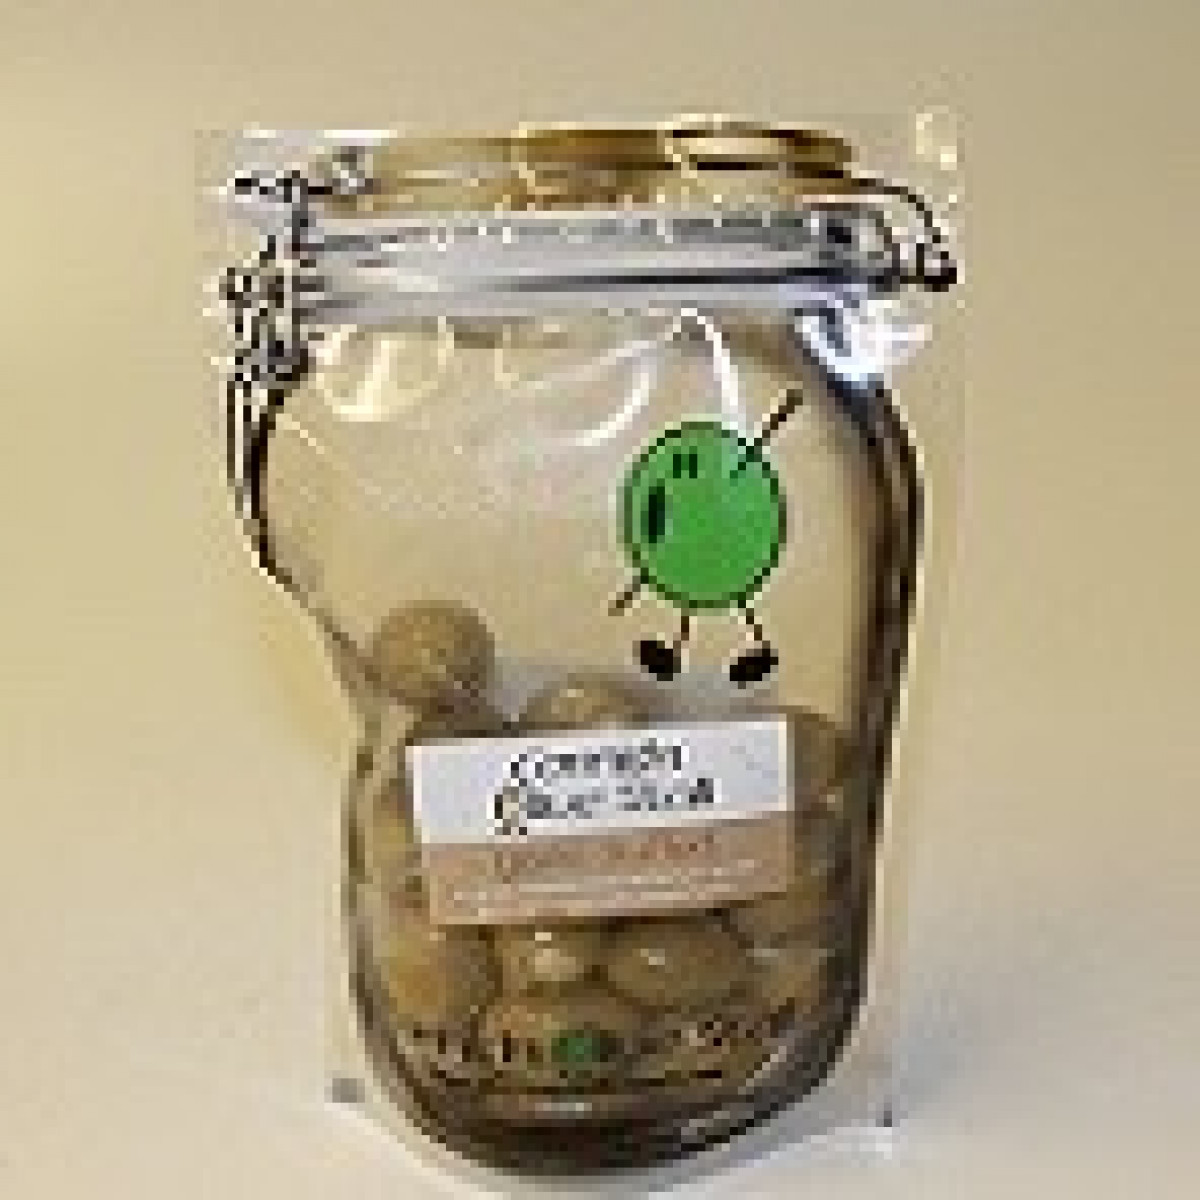 Product picture for Kalamata olives